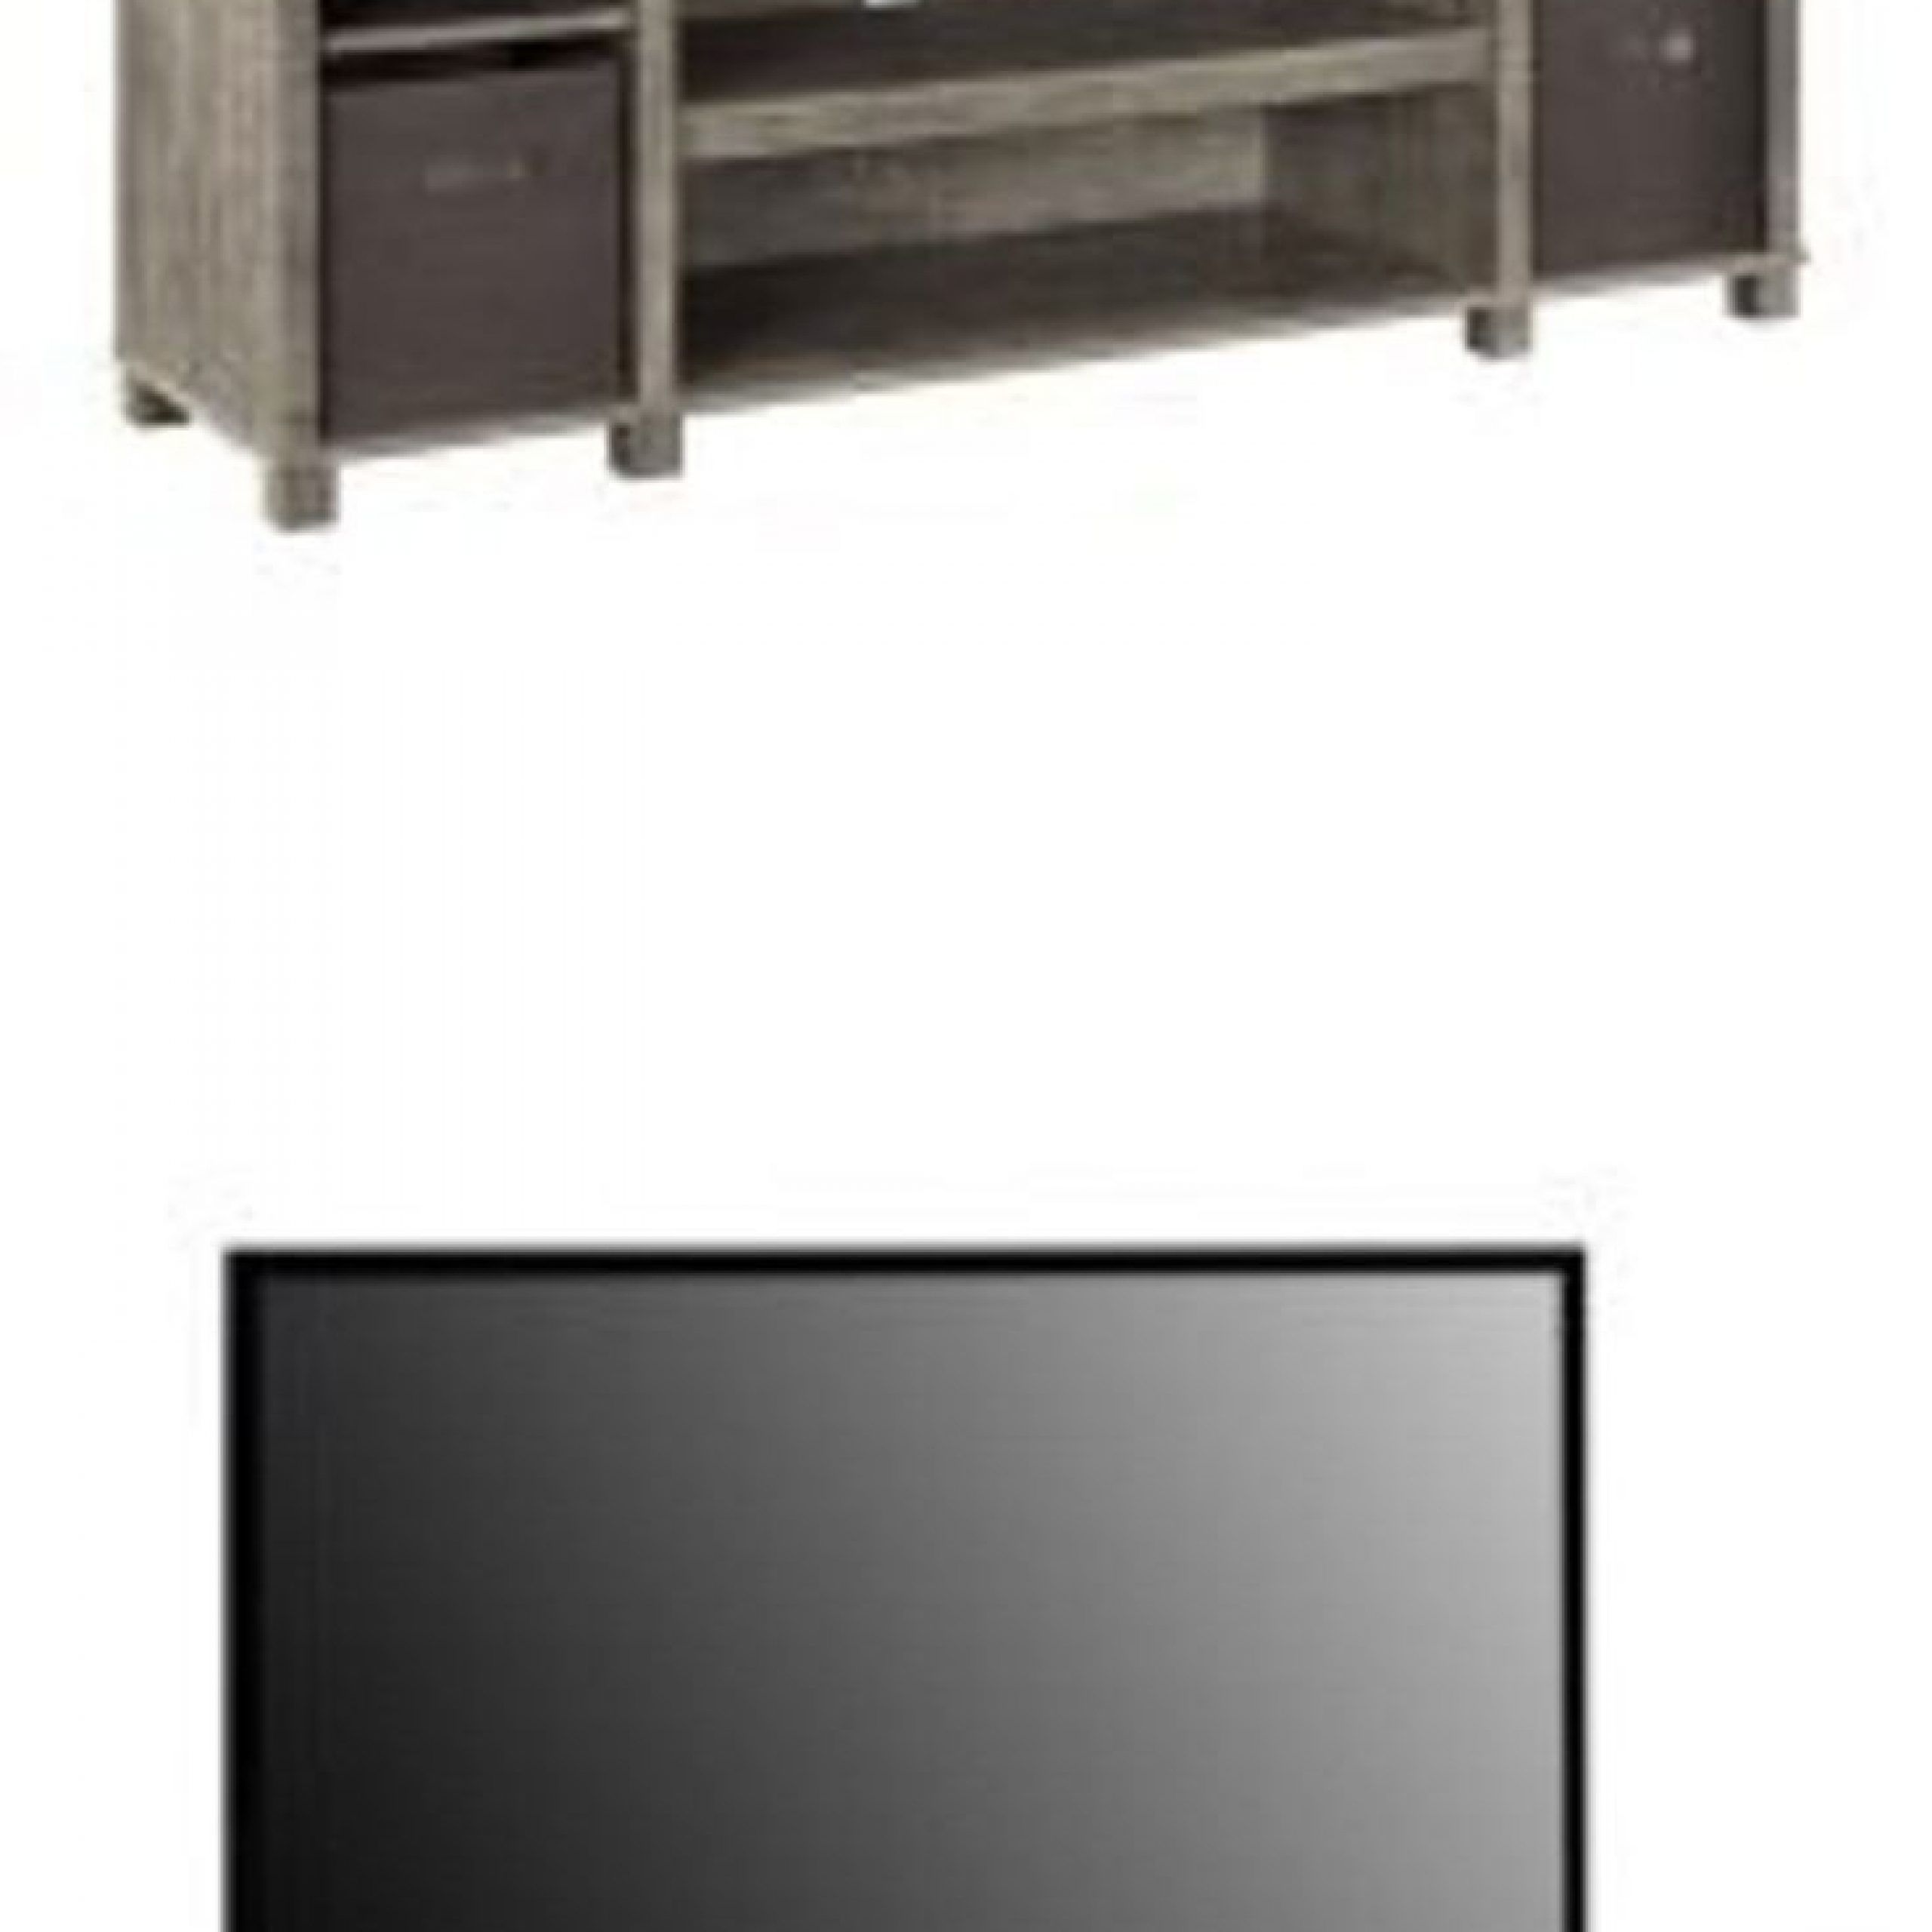 Mainstays Tv Stand With Bins For Tvs Up To 65", Gray (View 12 of 15)